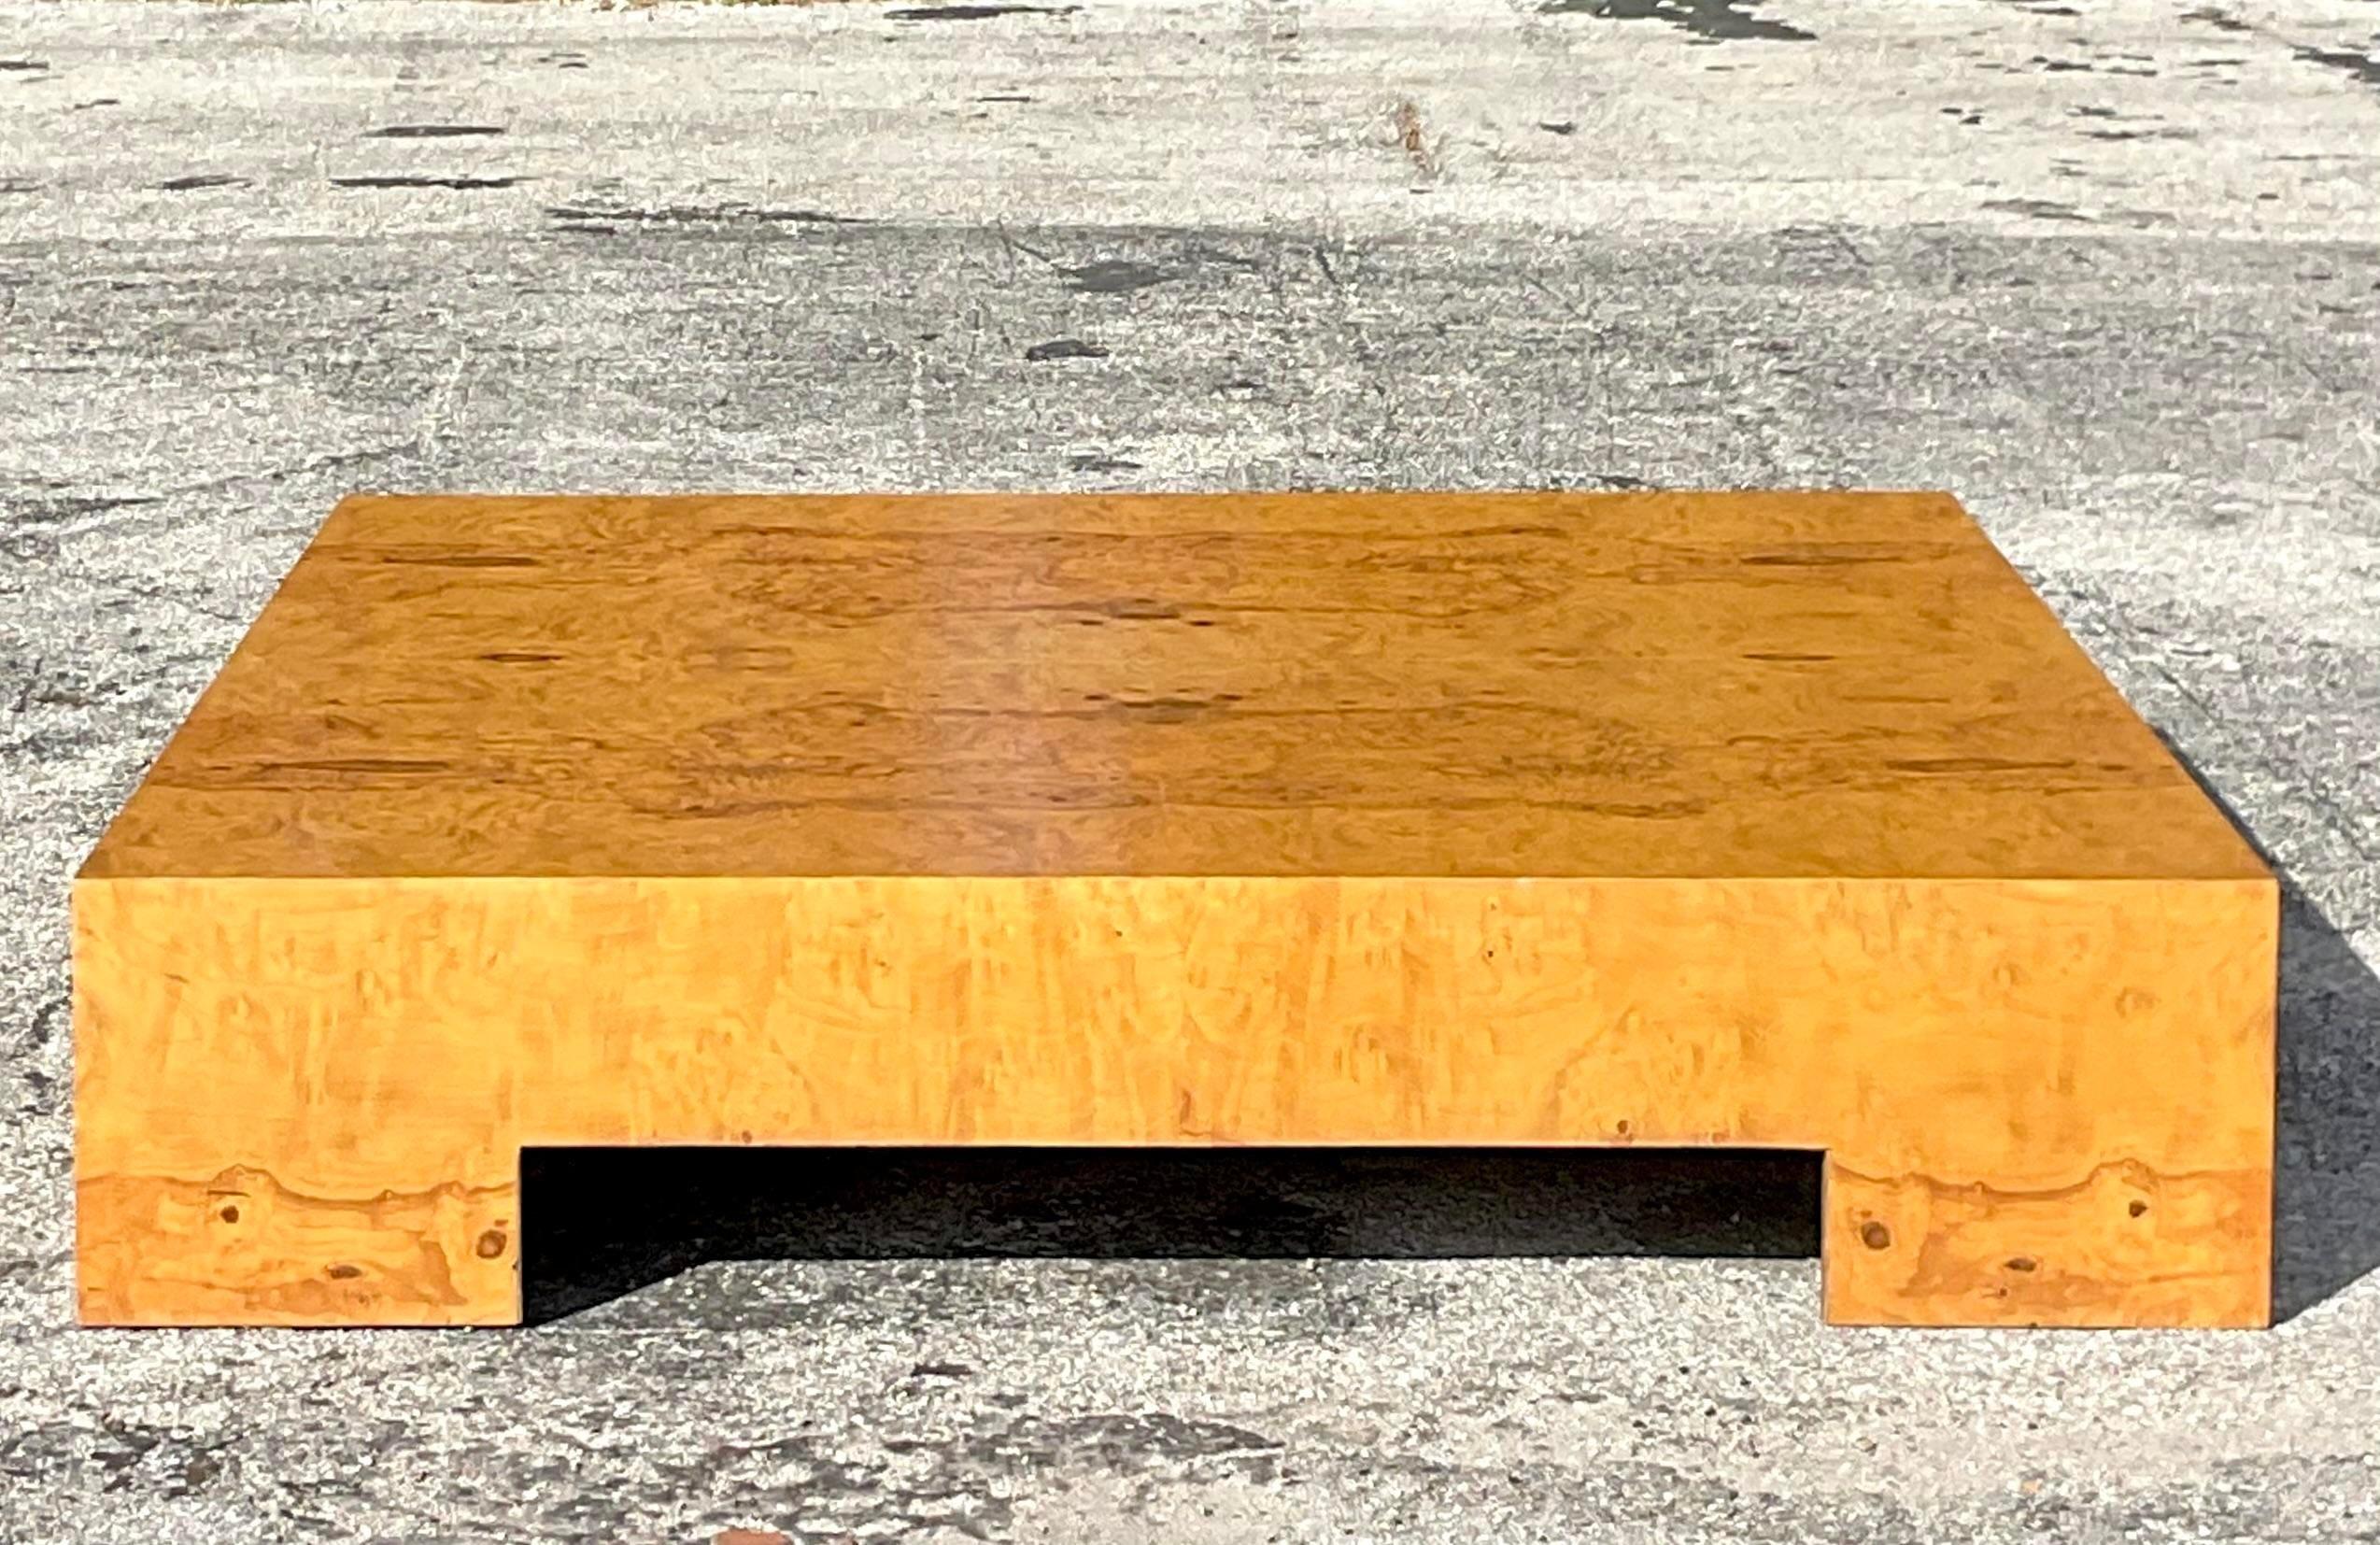 An exceptional vintage Boho coffee table. Done After Milo Baughman for Thayer Coggin. Gorgeous wood grain detail with a clean and modern shape. Acquired from a Palm Beach estate.